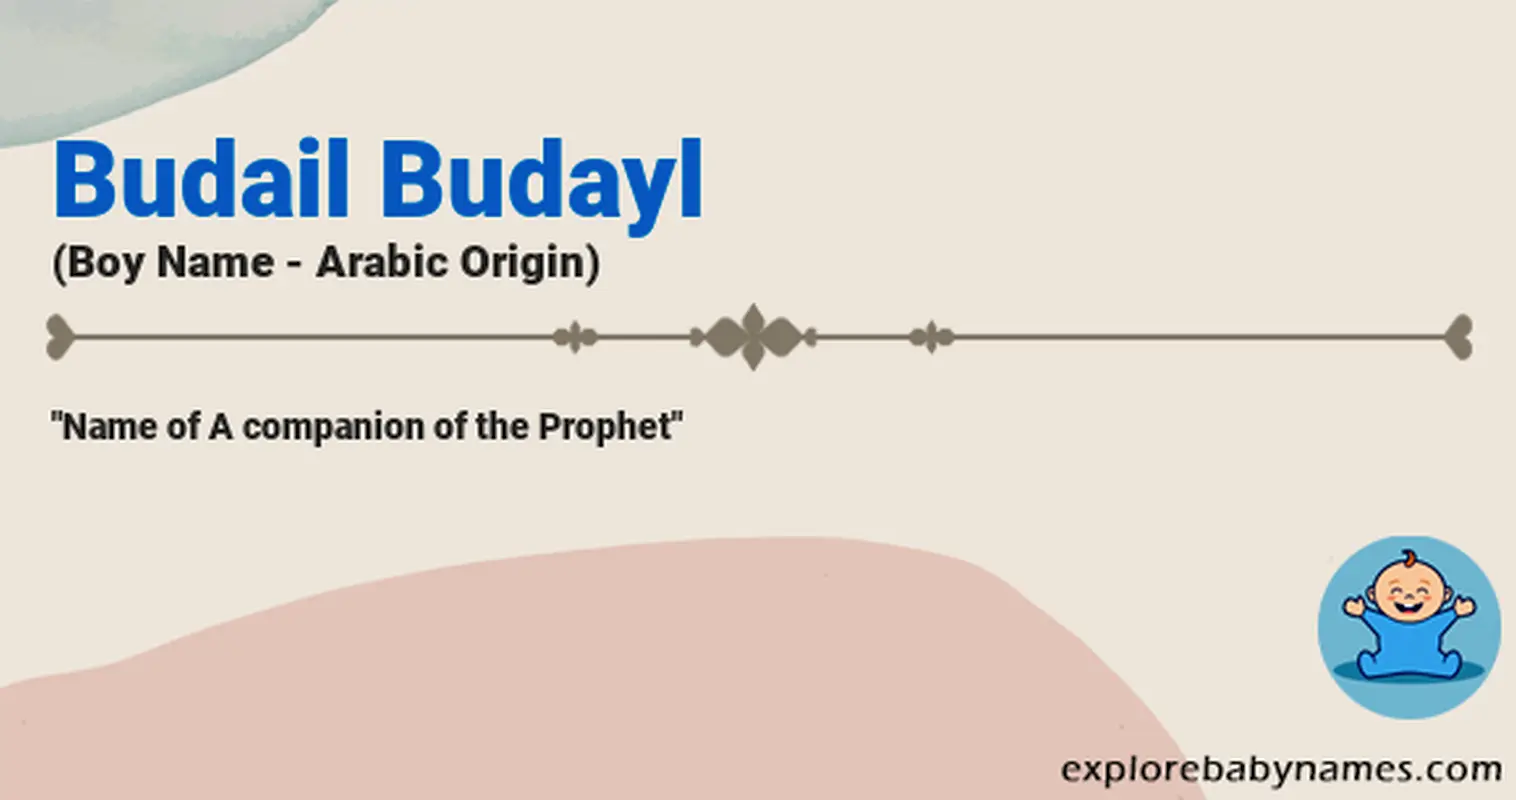 Meaning of Budail Budayl